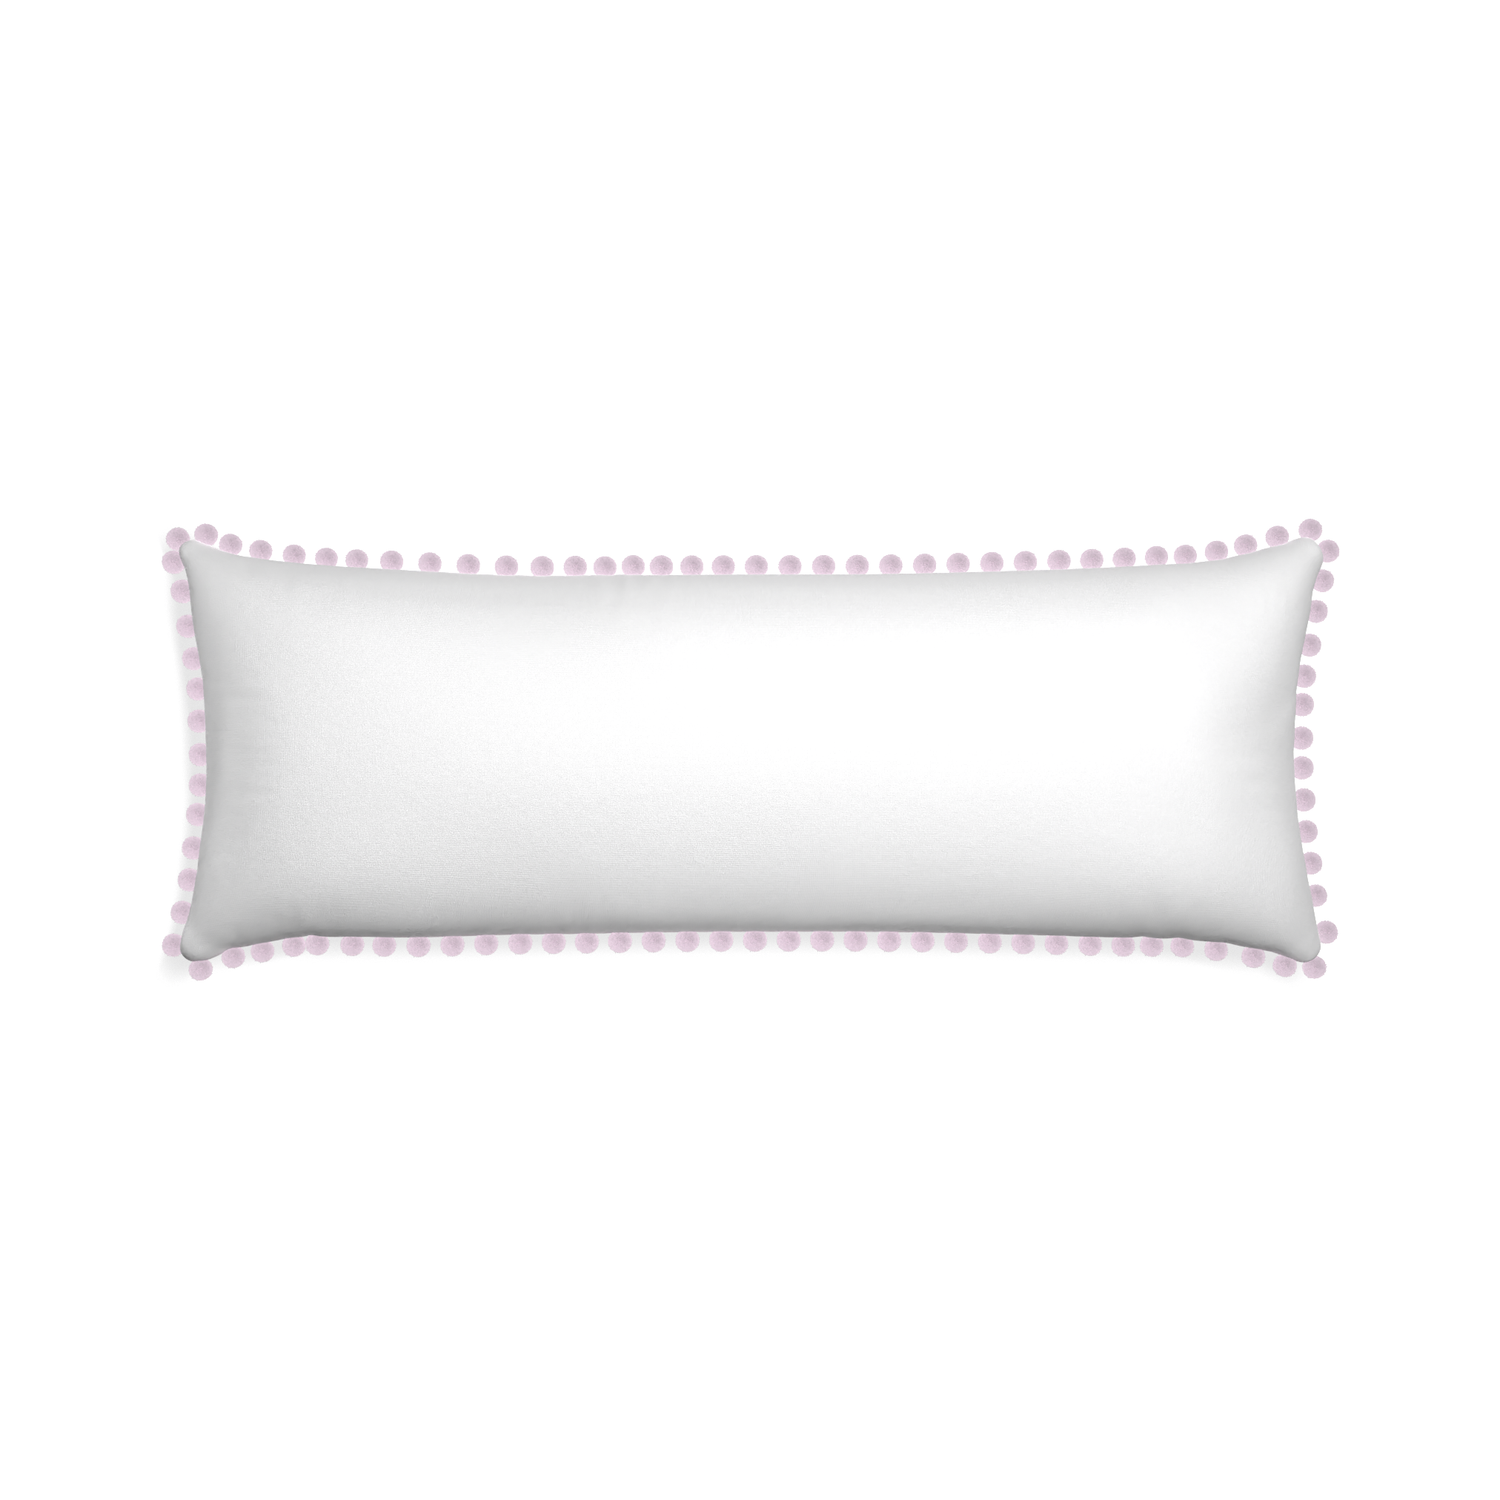 Xl-lumbar snow custom pillow with l on white background